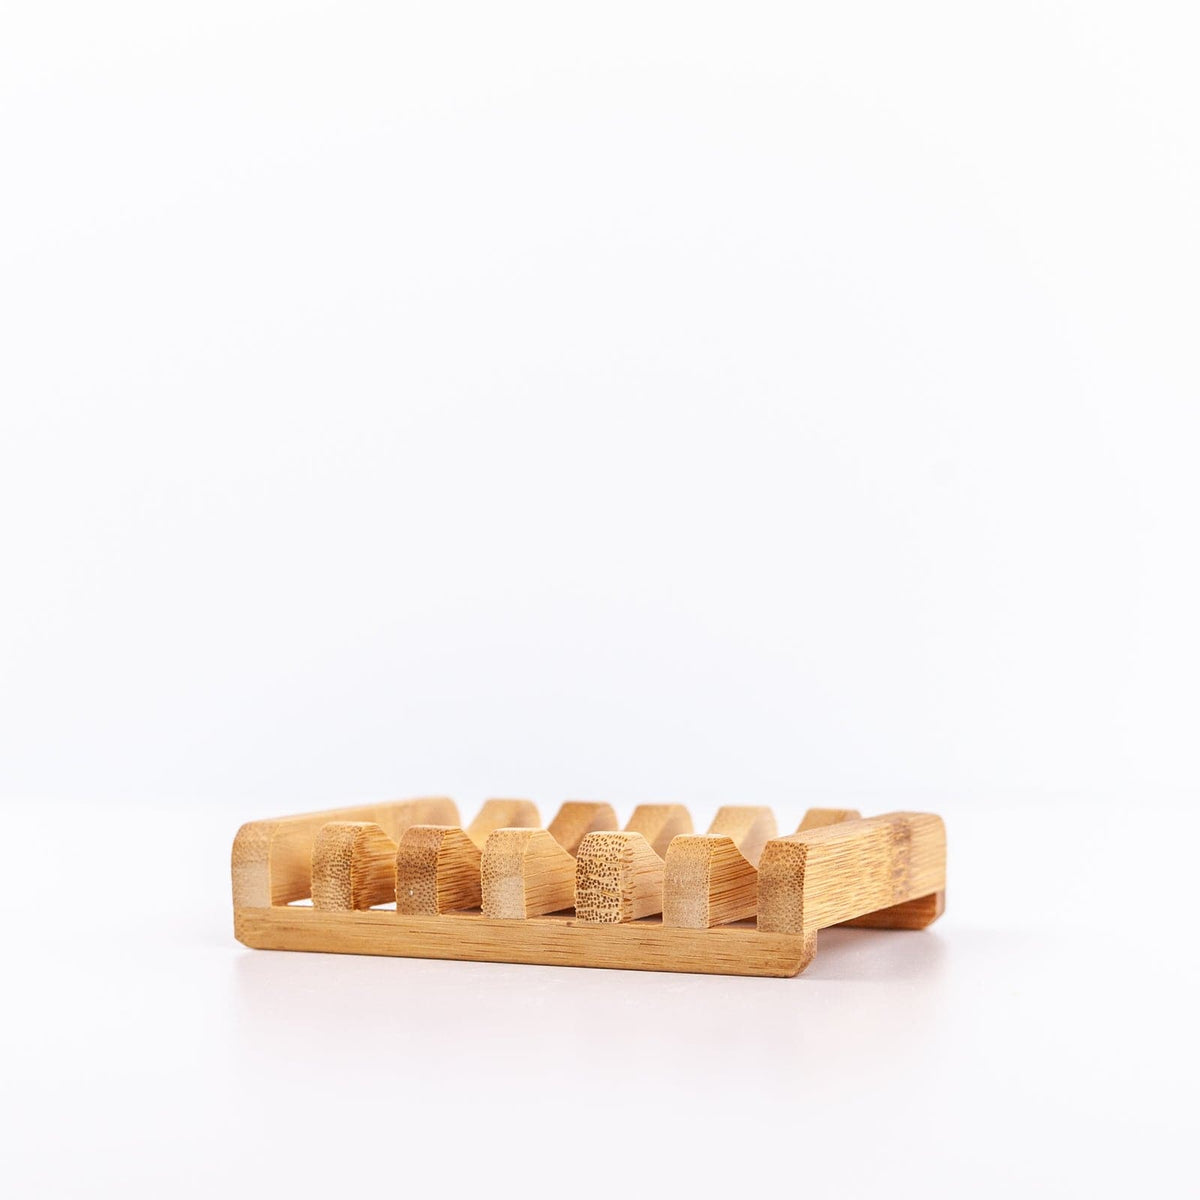 Rectangle Wooden Soap Dish